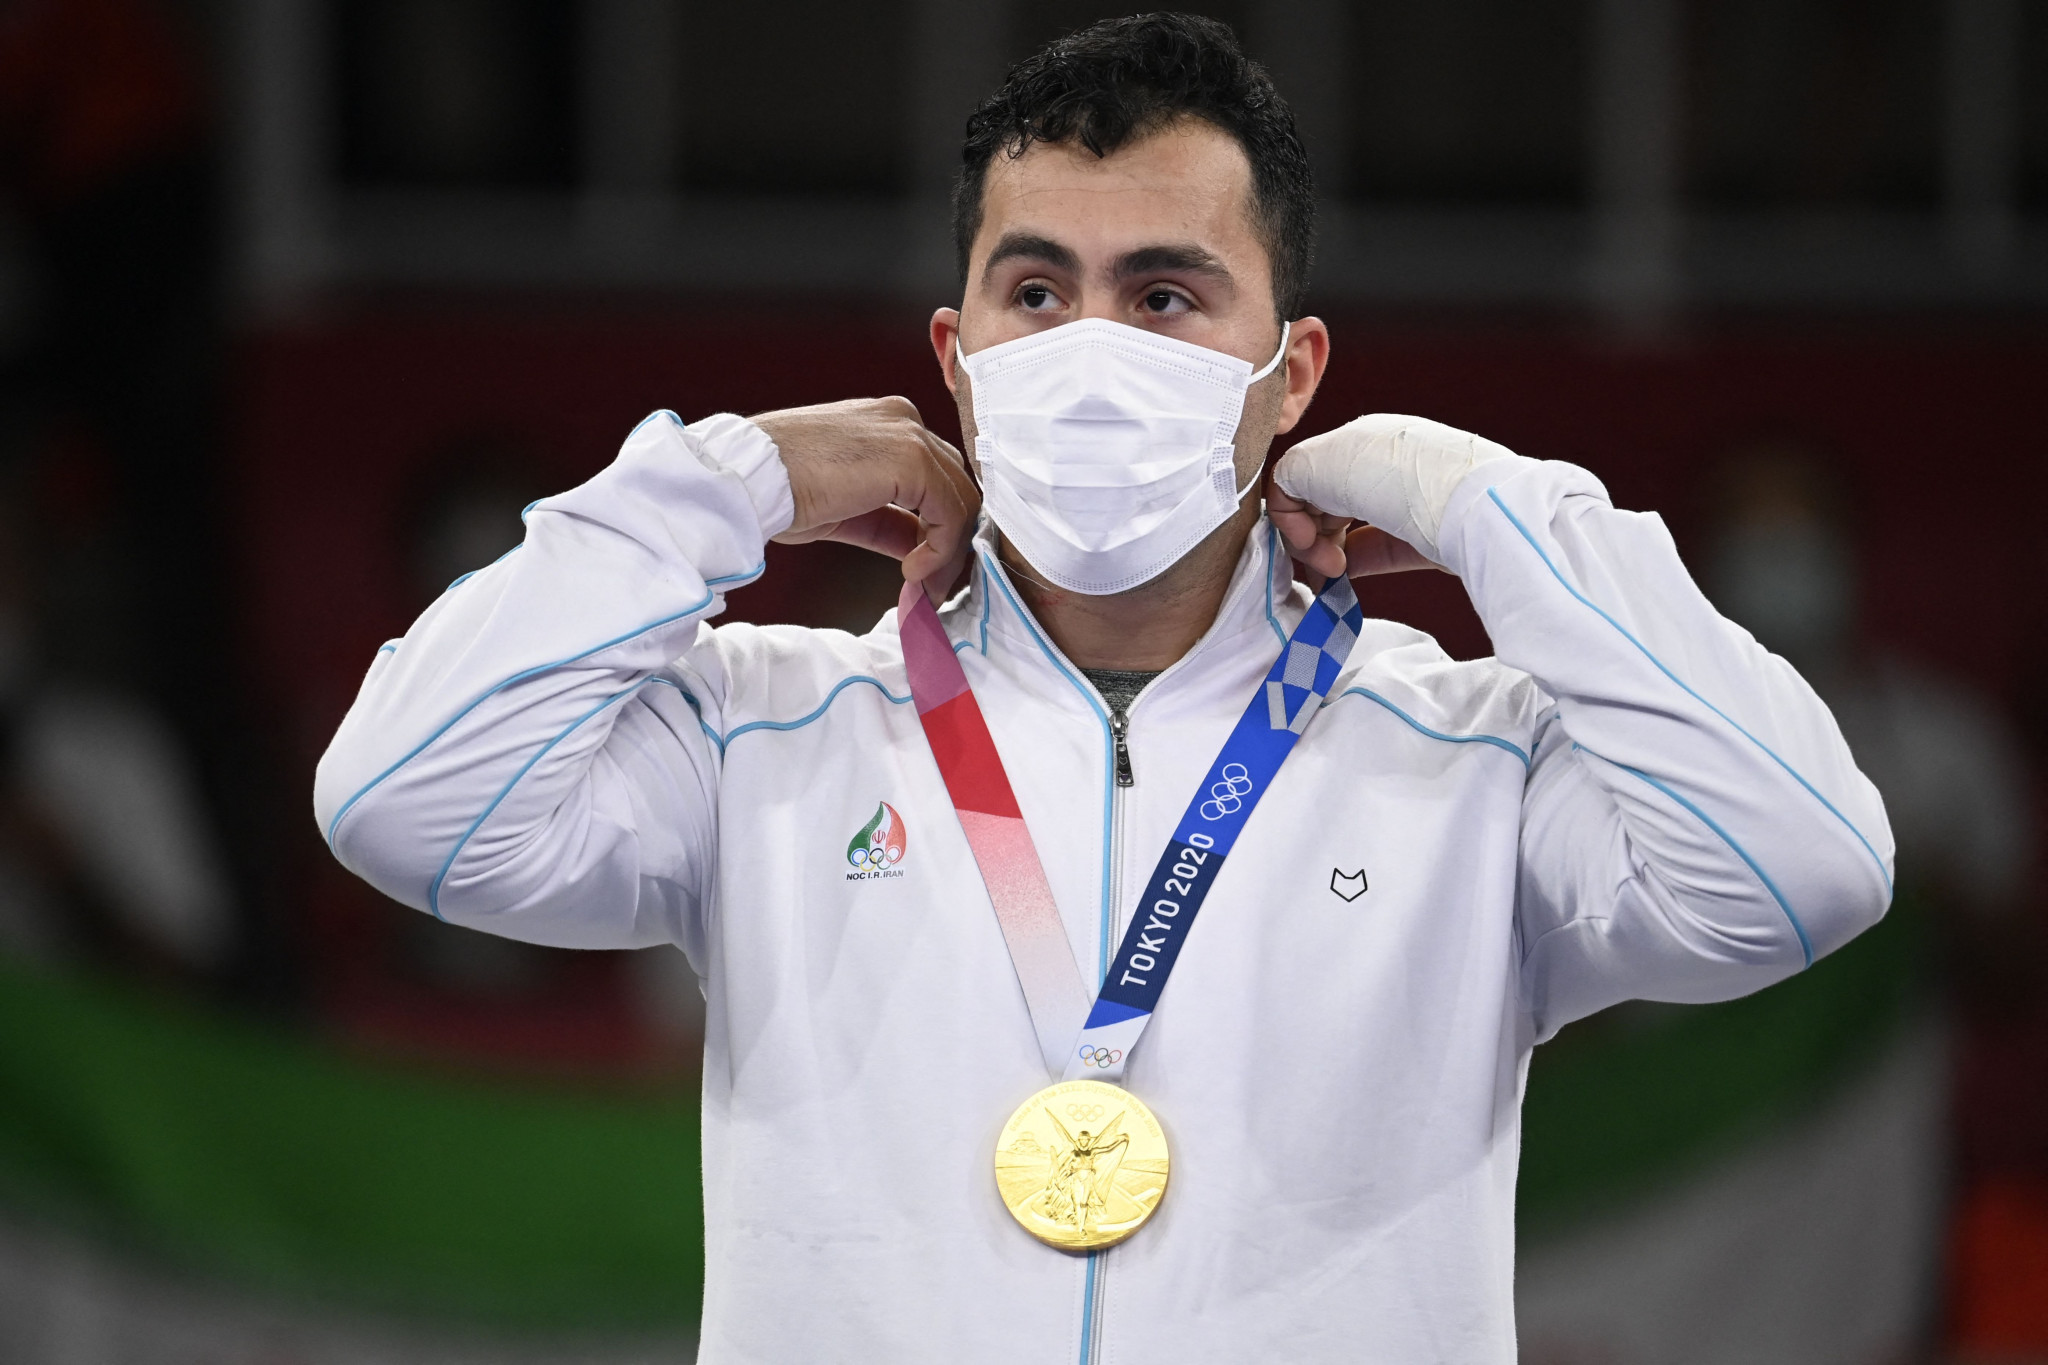 Olympic karate champion Ganjzadeh criticises Iran's sporting policy on Israel